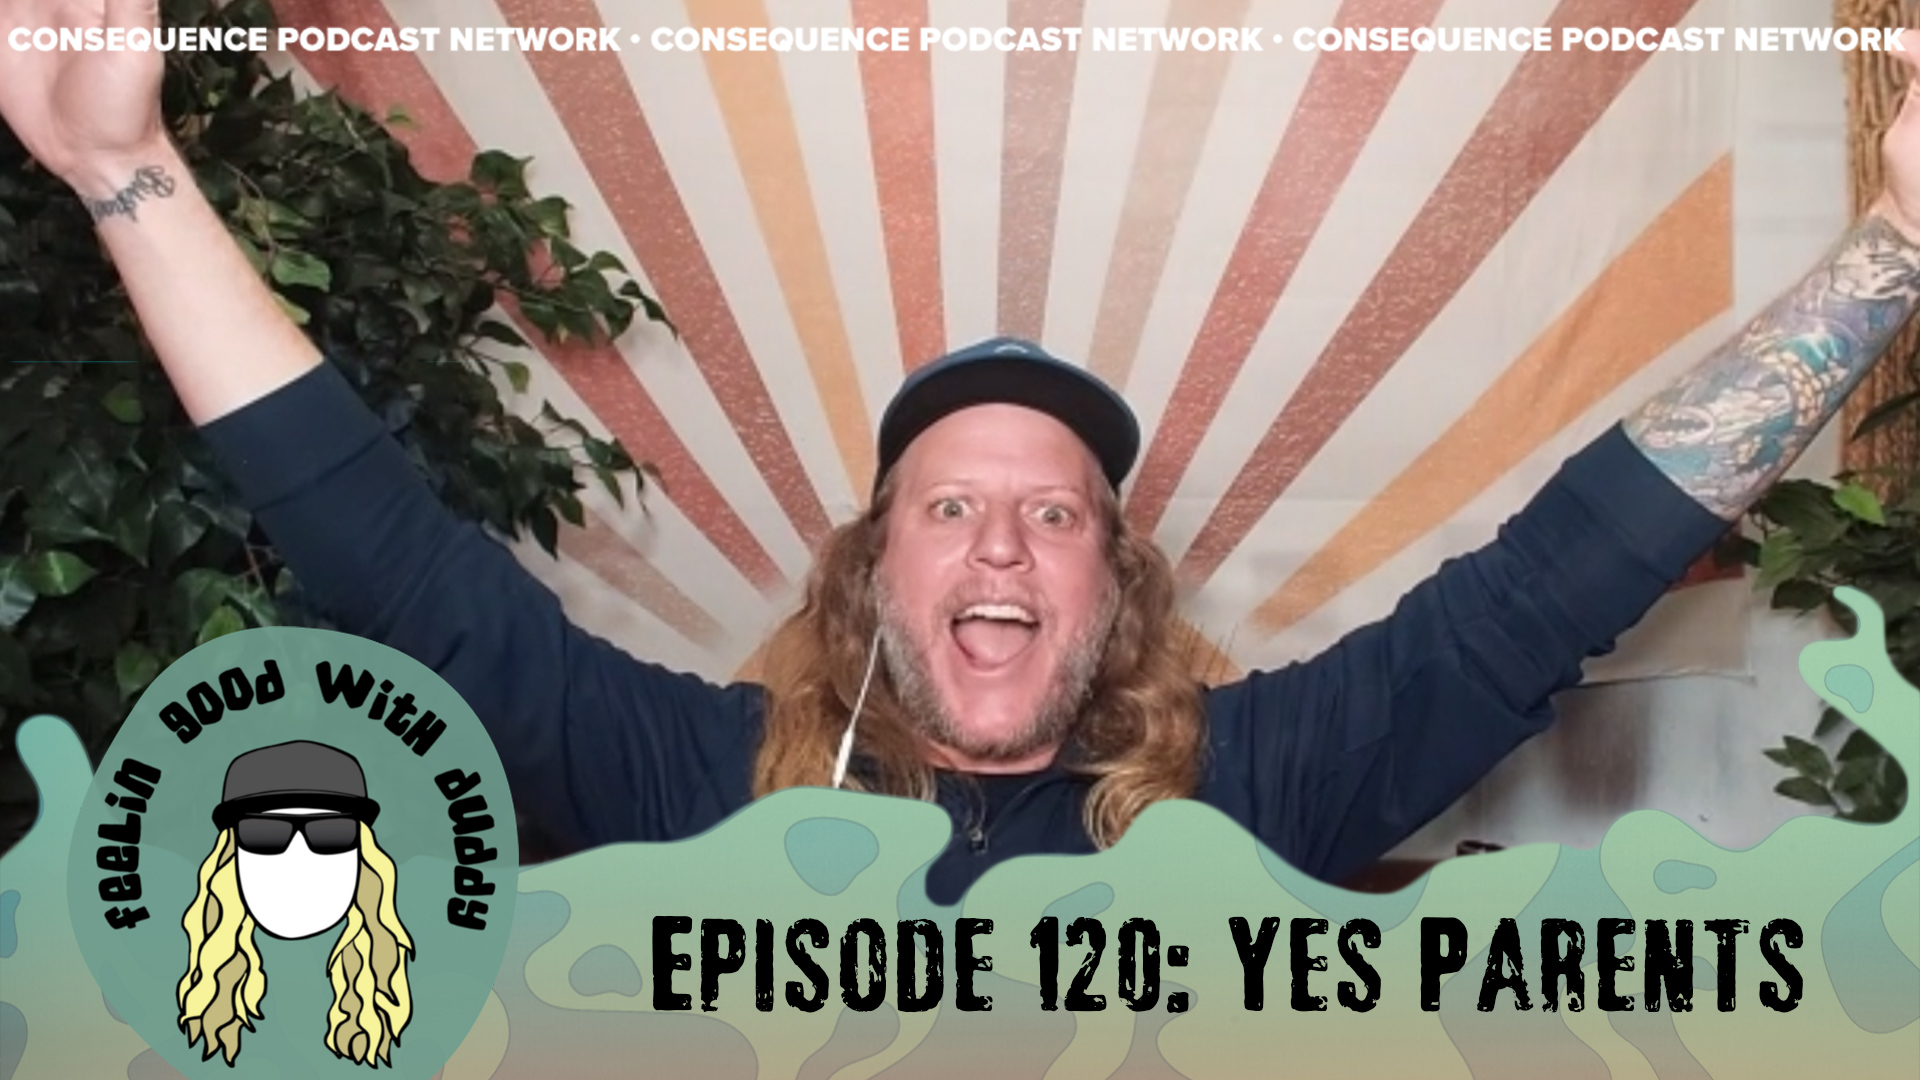 Feelin Good with Duddy Episode 119: Yes Parents